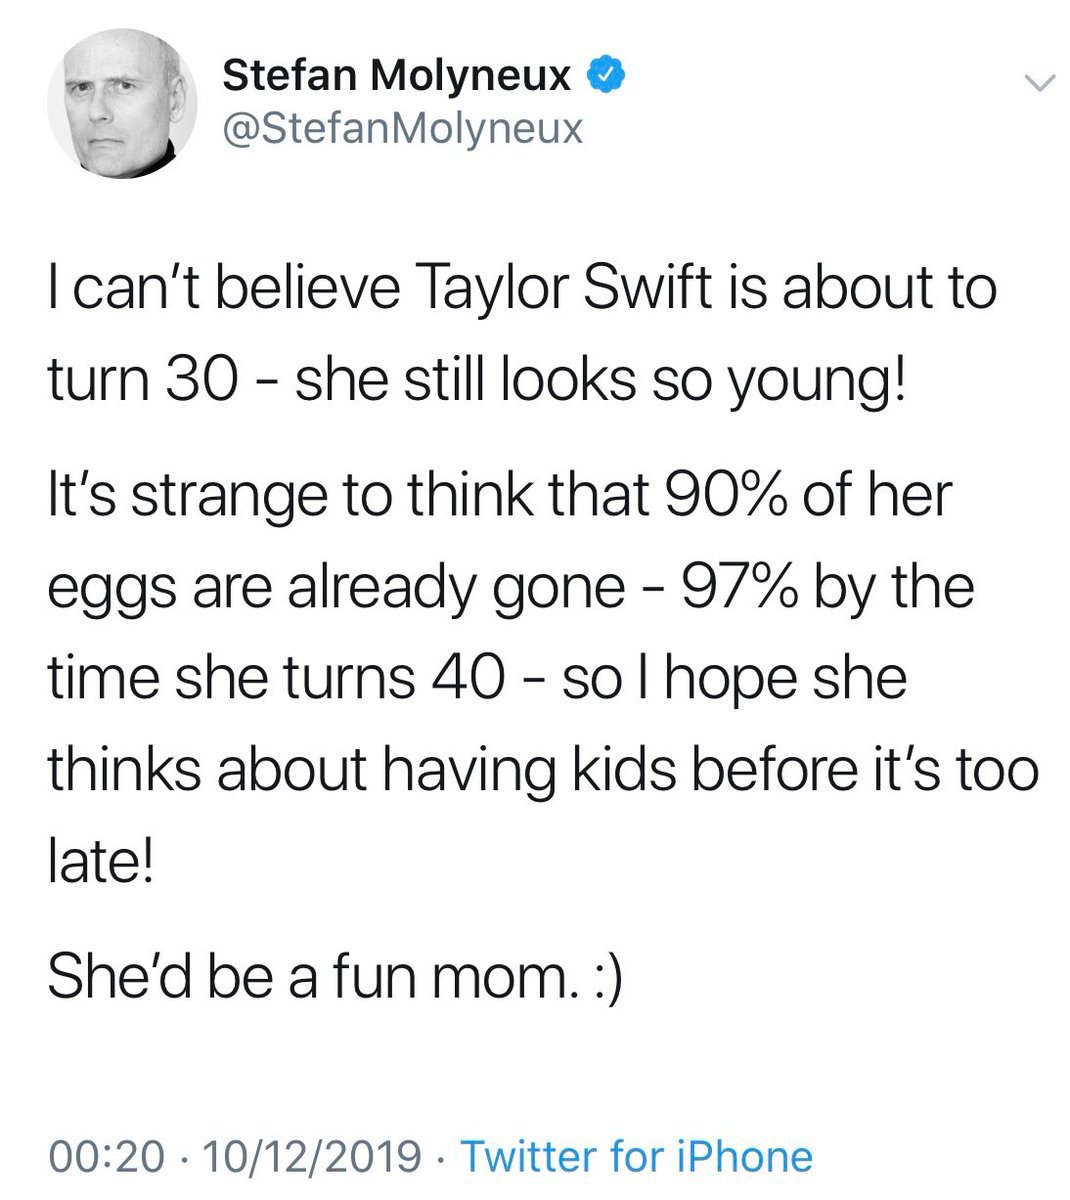 worst tweets of all time - quotes - Stefan Molyneux I can't believe Taylor Swift is about to turn 30 she still looks so young! It's strange to think that 90% of her eggs are already gone 97% by the time she turns 40 so I hope she thinks about having kids 